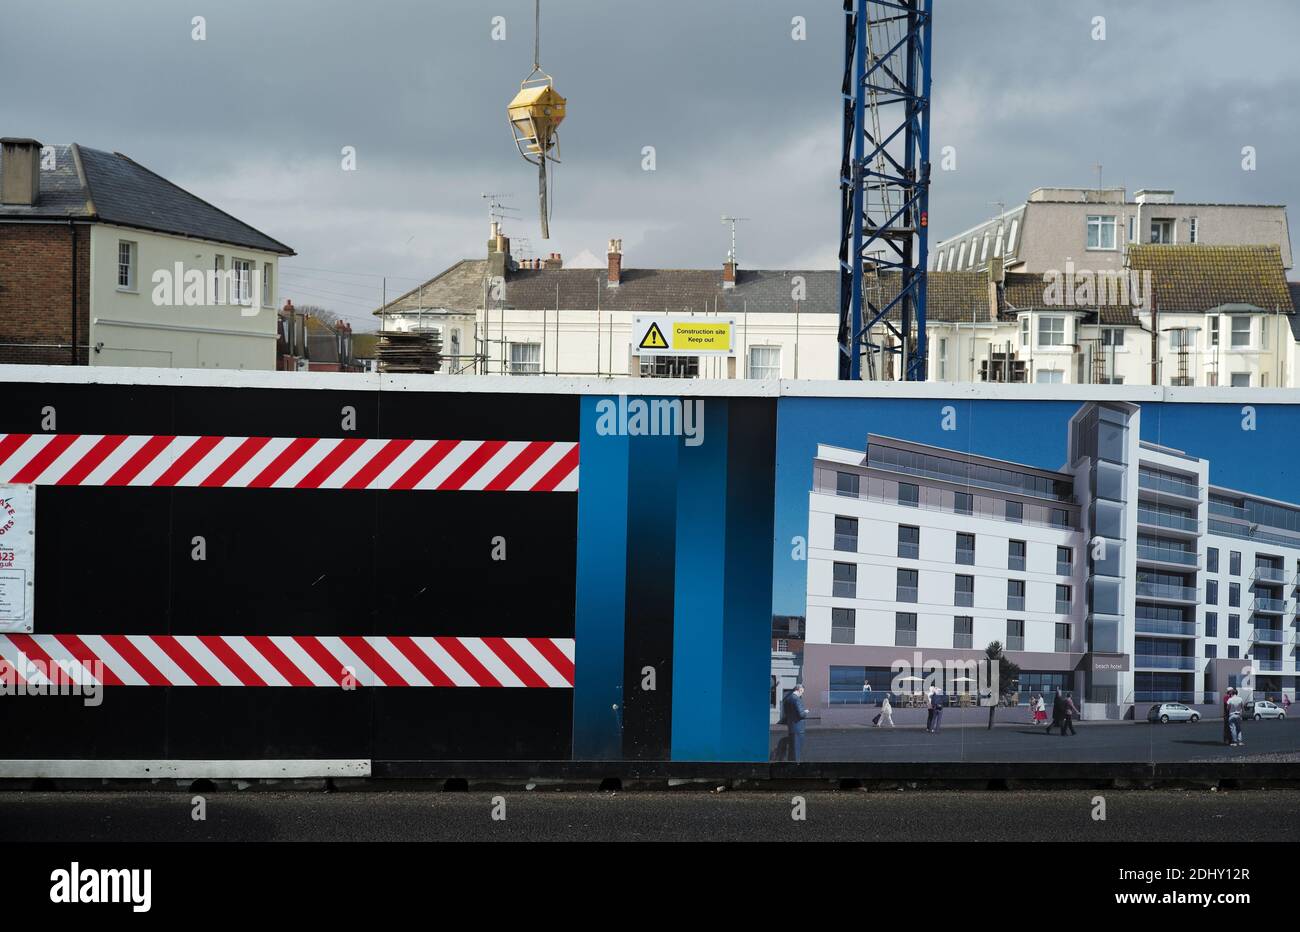 AJAXNETPHOTO. 2019. WORTHING, ENGLAND. - BUILDING SITE - MARINE PARADE VENUE FOR NEW BEACH HOTEL COMPLEX OVERLOOKNG SEA FRONT. PHOTO:JONATHAN EASTLAND/AJAX REF:LM131904 8715 Stock Photo